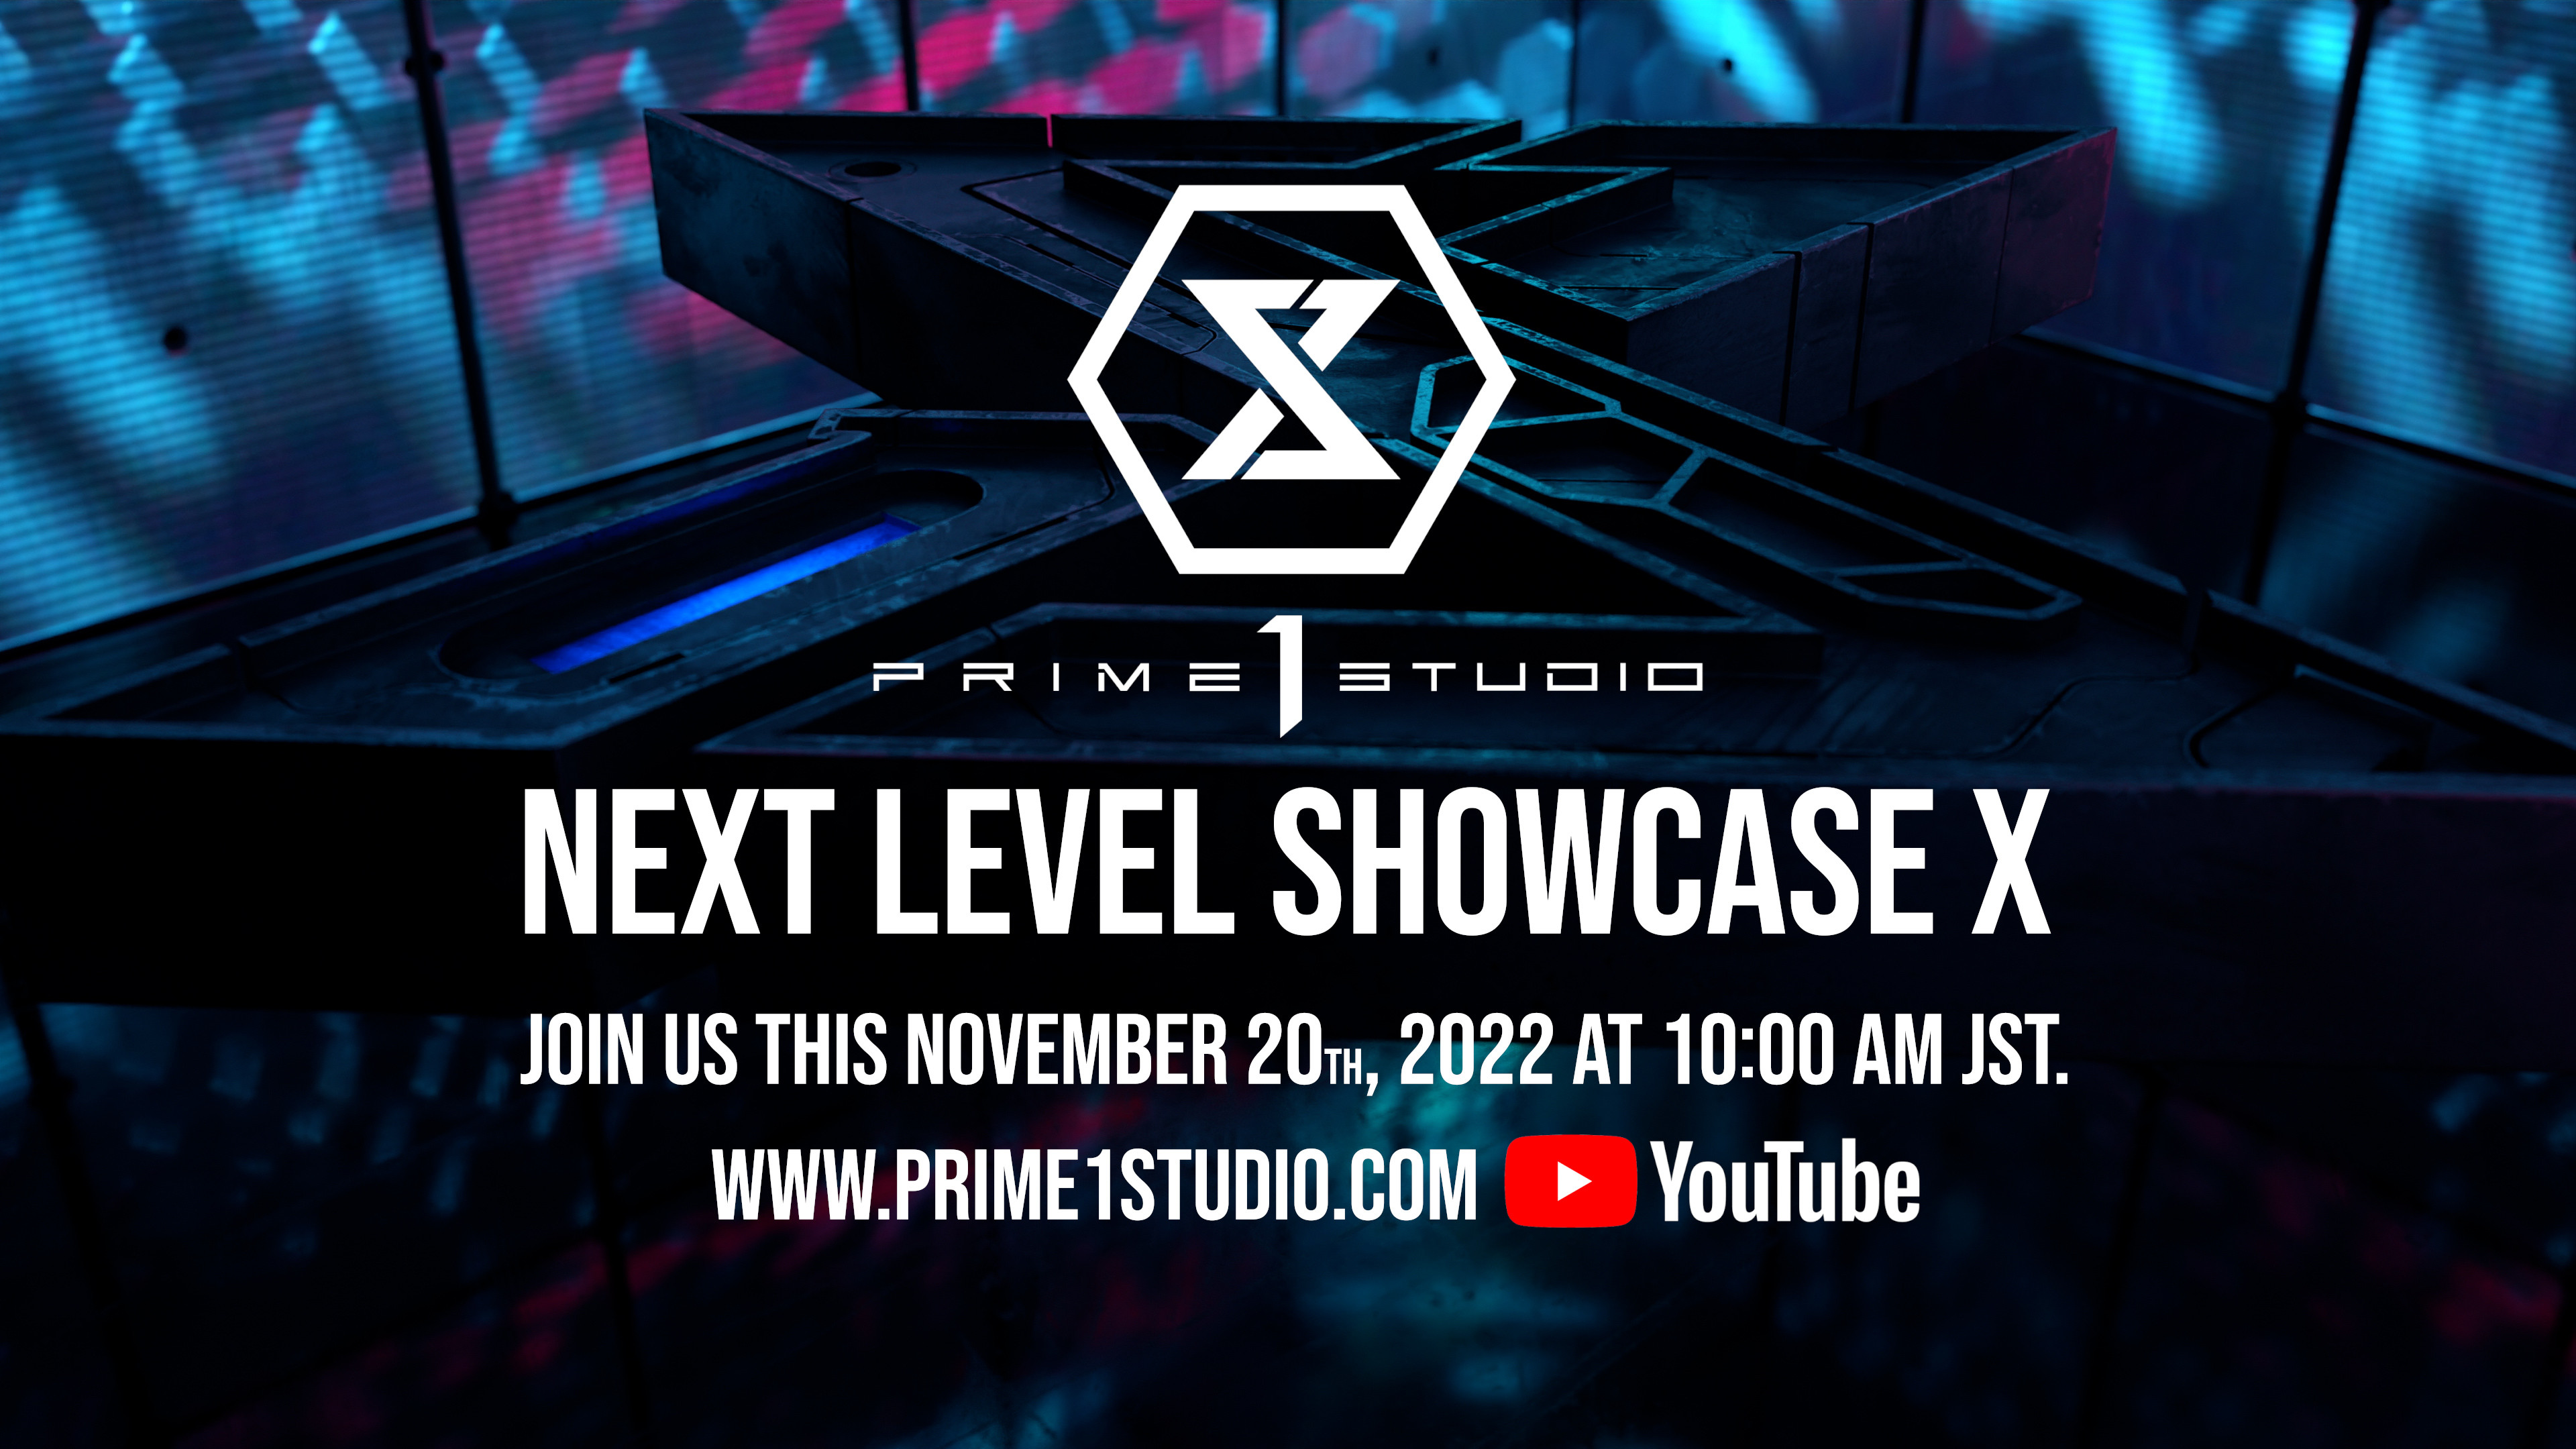 Join our Next Level Showcase X on YouTube on November 19th